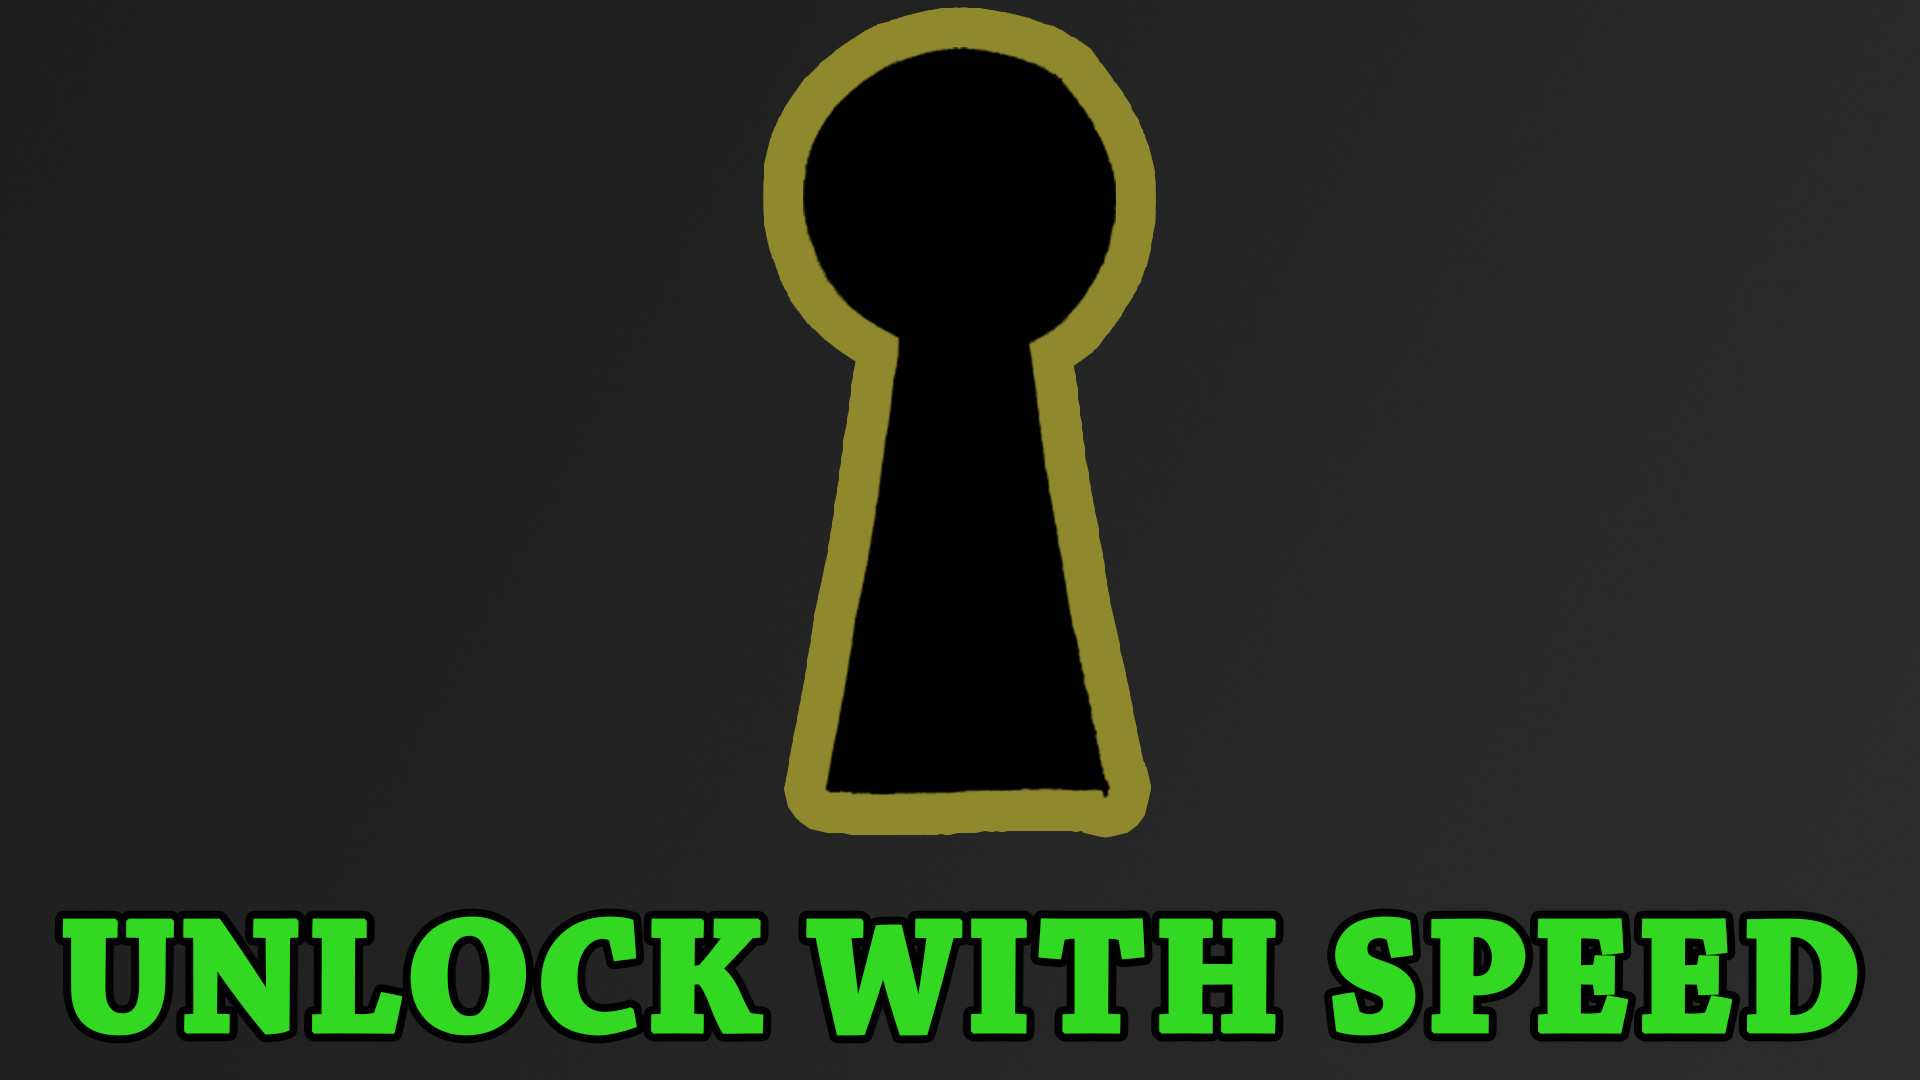 … AlpinesGraphics JackSepticEye T-Shirt Idea – Unlock With Speed by  AlpinesGraphics